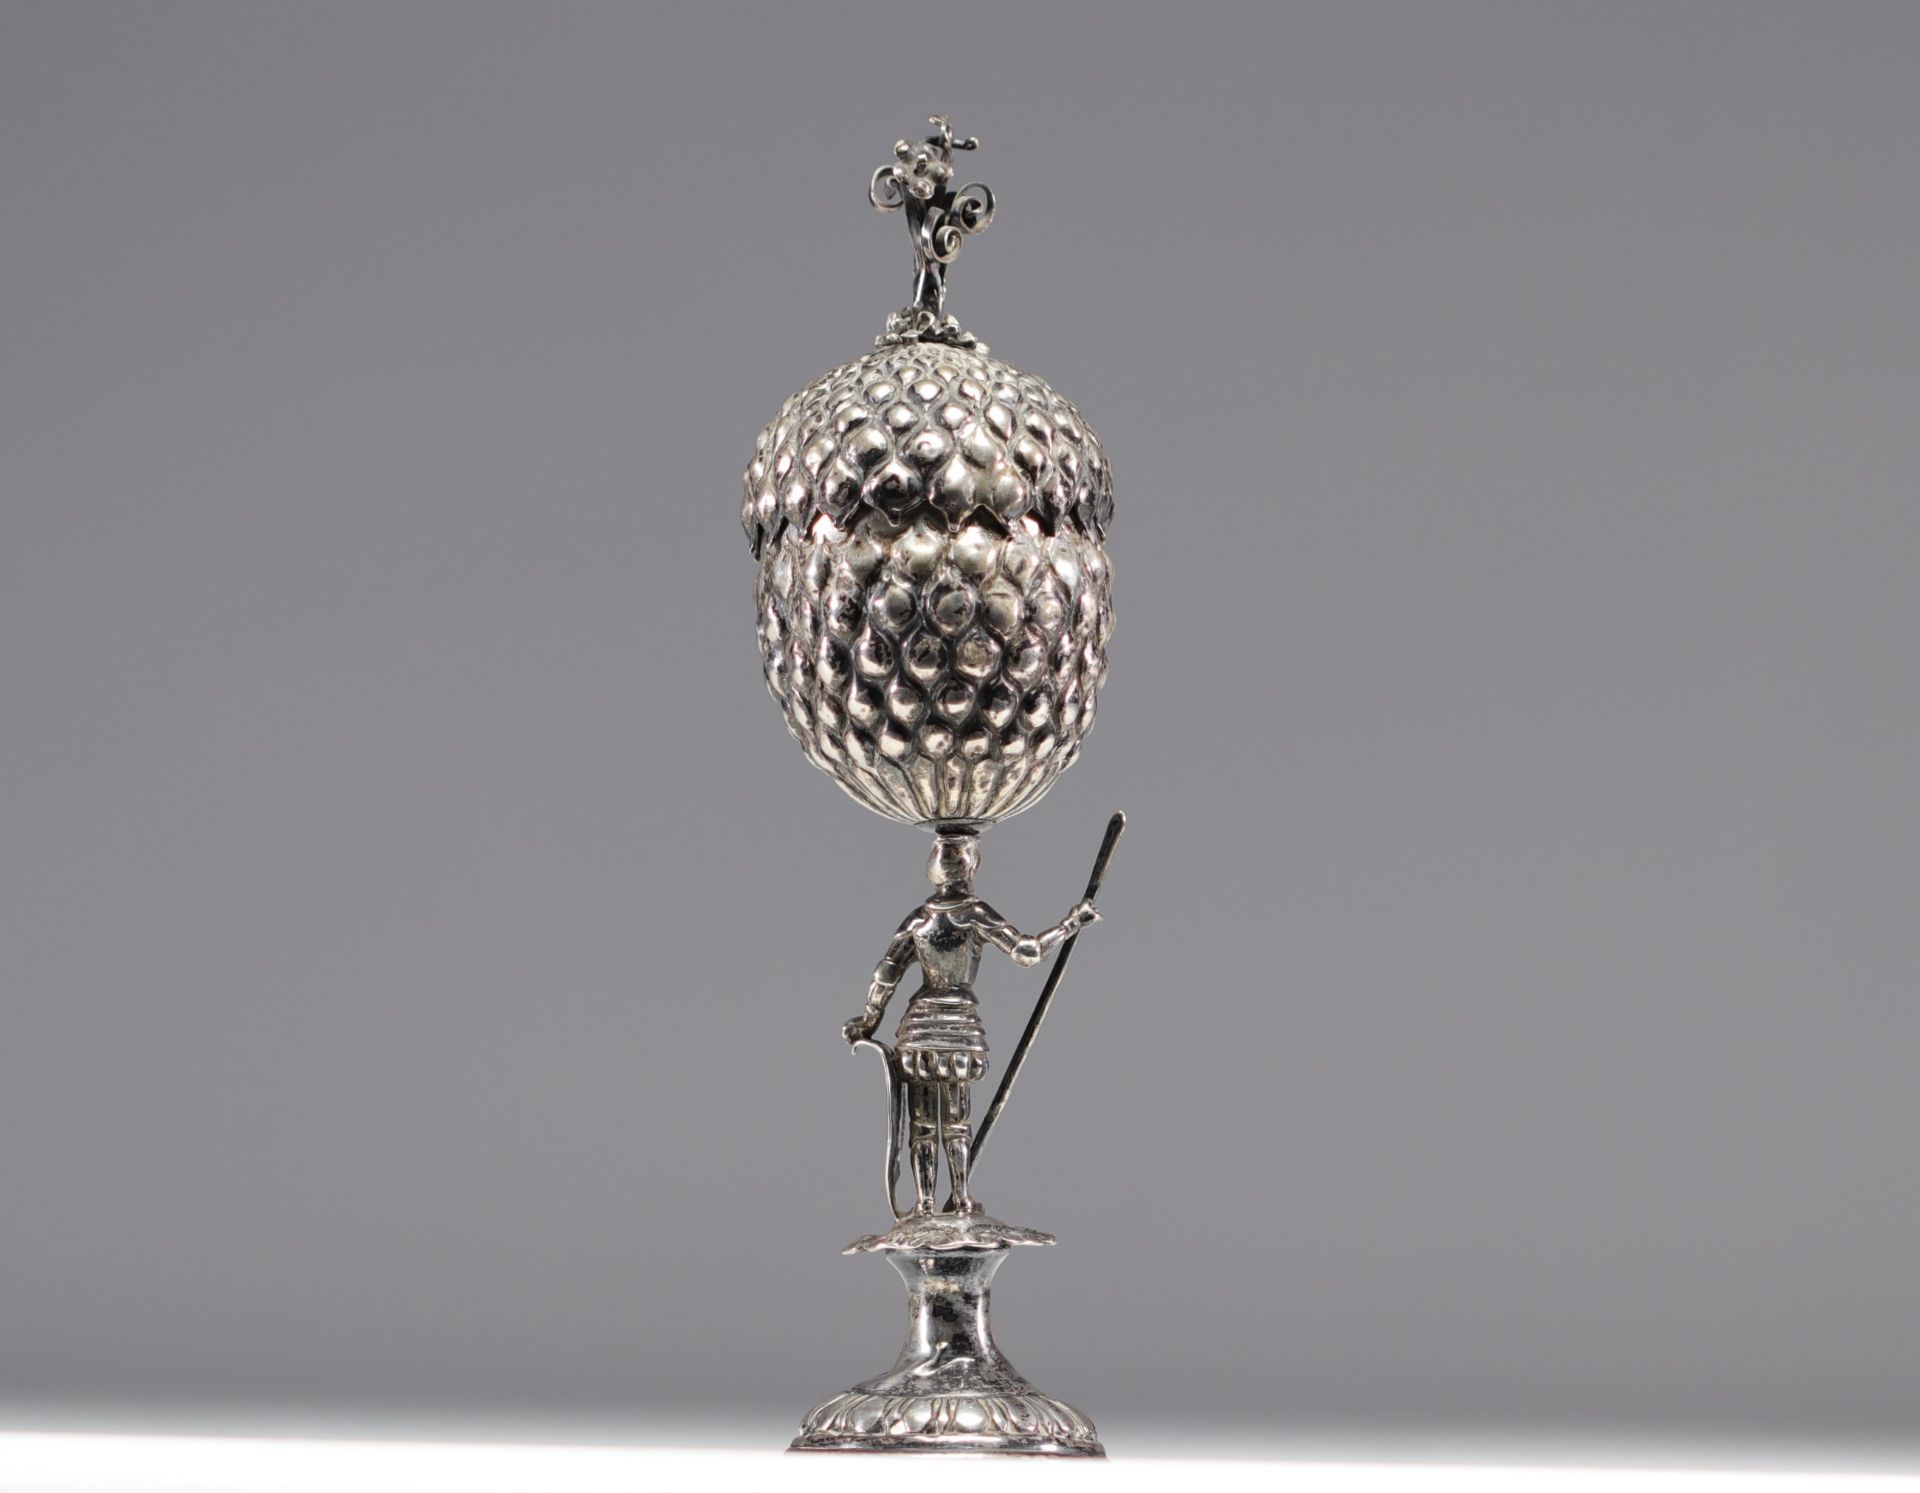 Covered hanap with pineapple-shaped lid in solid silver Nuremberg pewter from 17th centuryÂ - Image 2 of 4